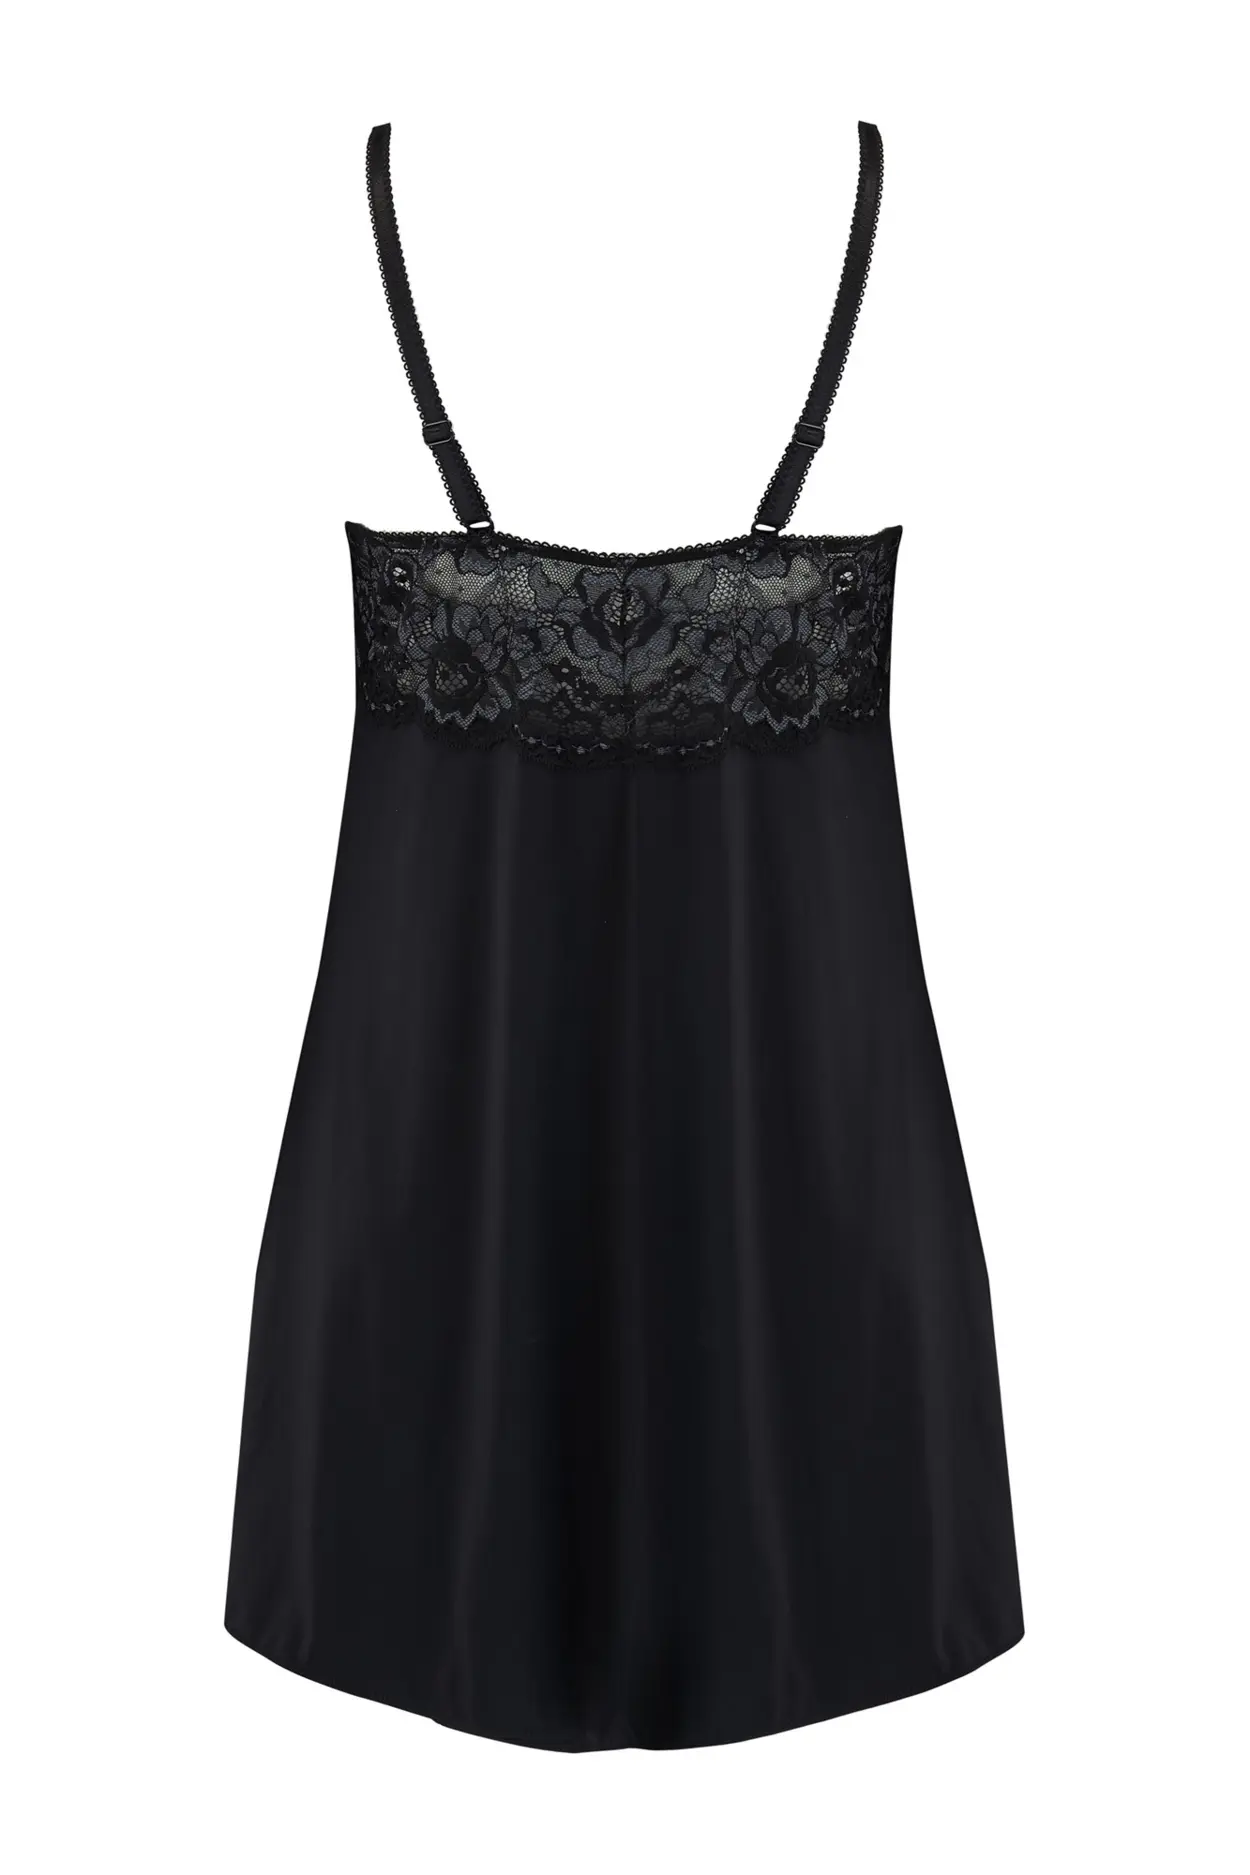 Opulence Lace Chemise in Slate/Black | Pour Moi